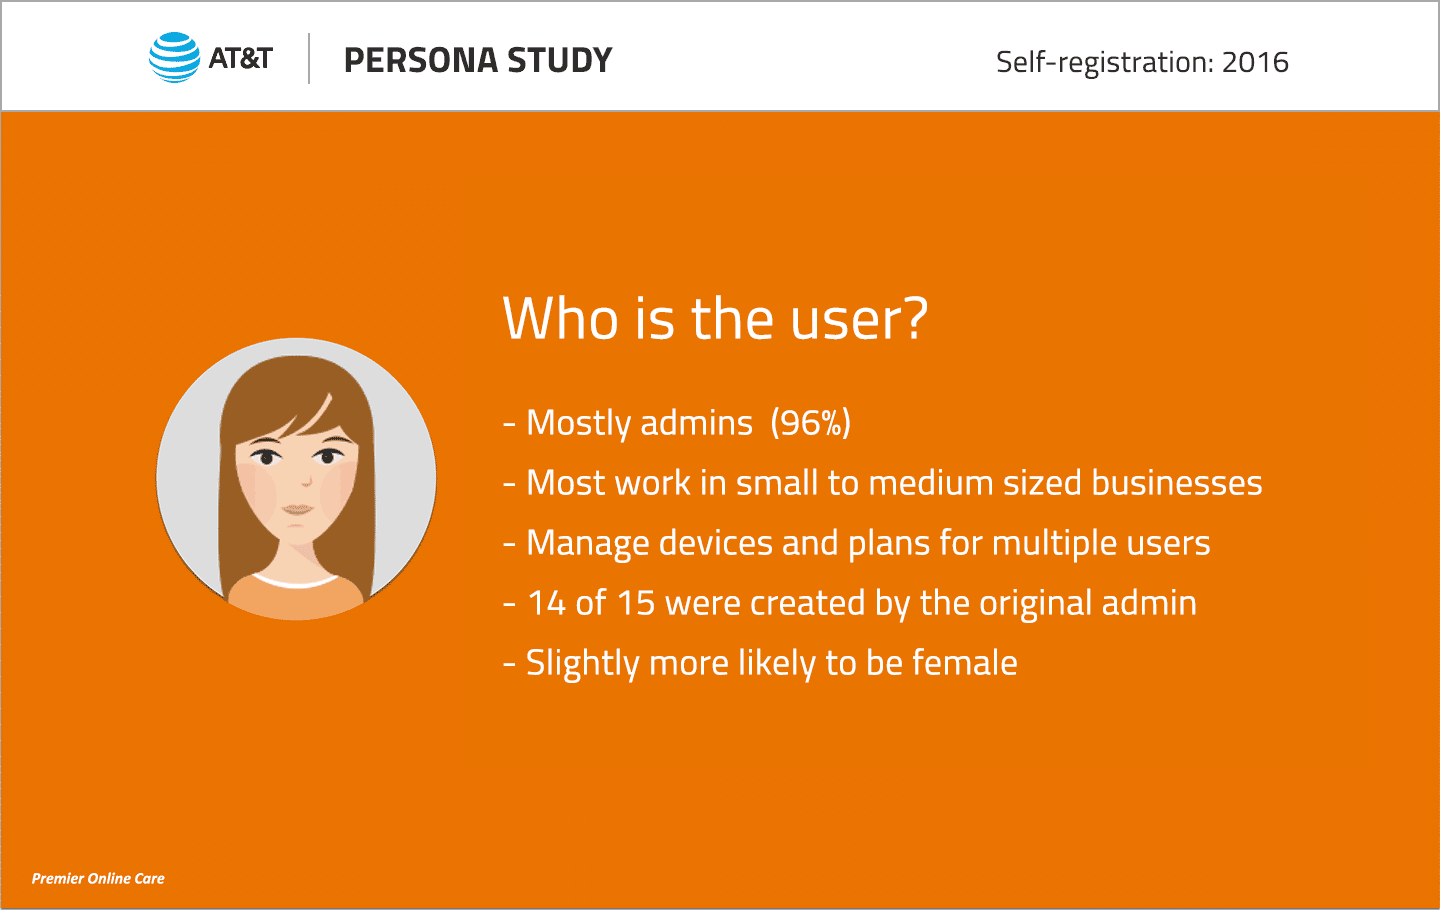 AT&T persona graphic